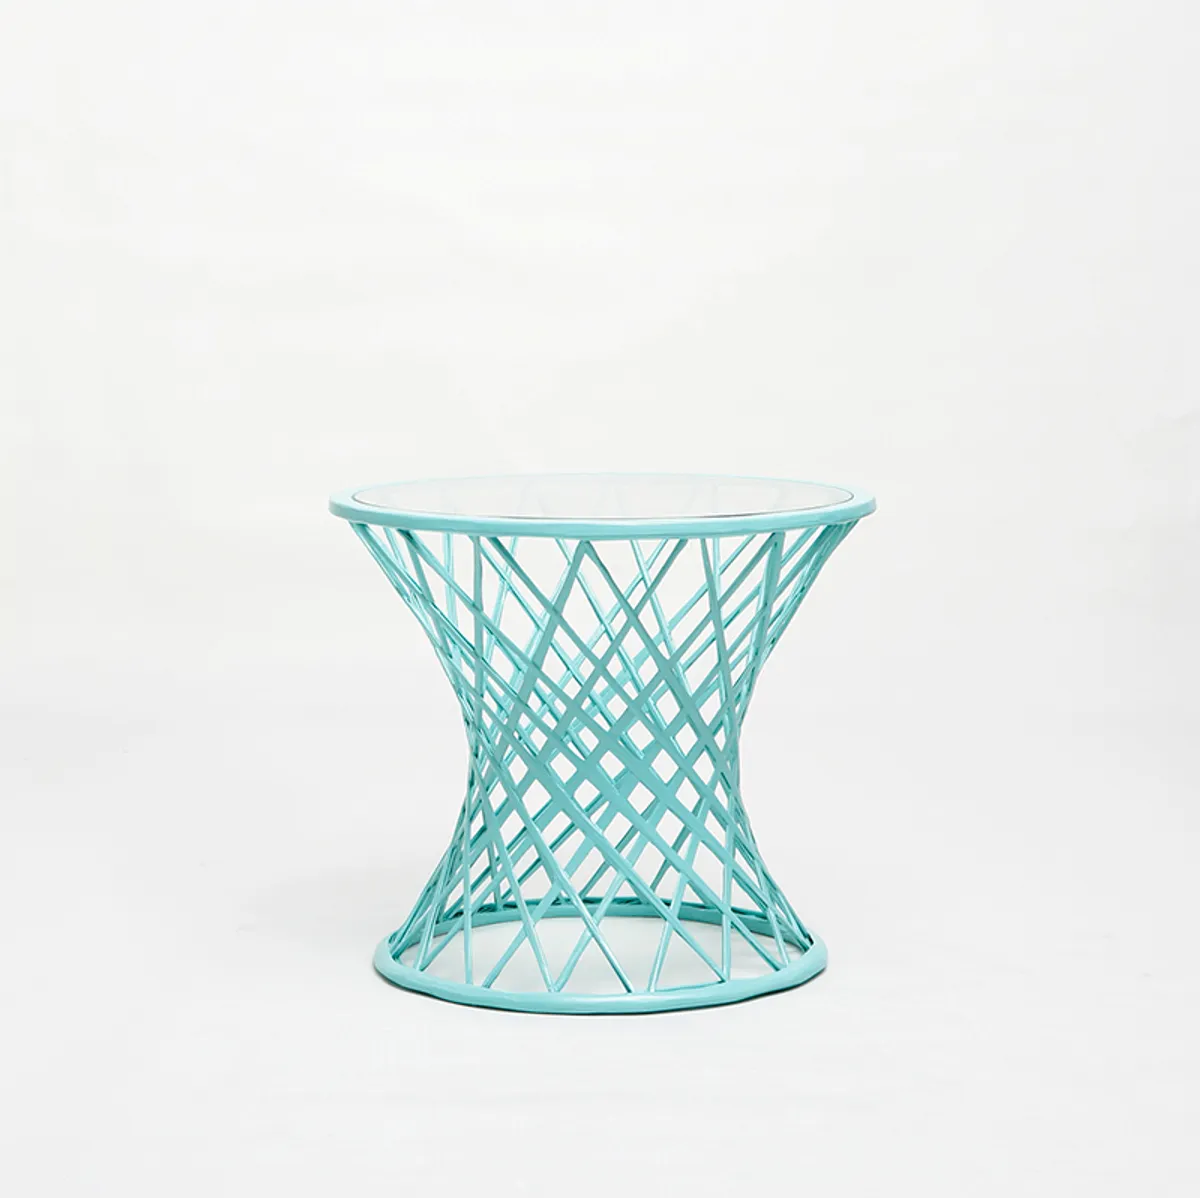 Cacti Side Table Outdoor Furniture For Hotels Spas And Healthcare By Insideoutcontracts